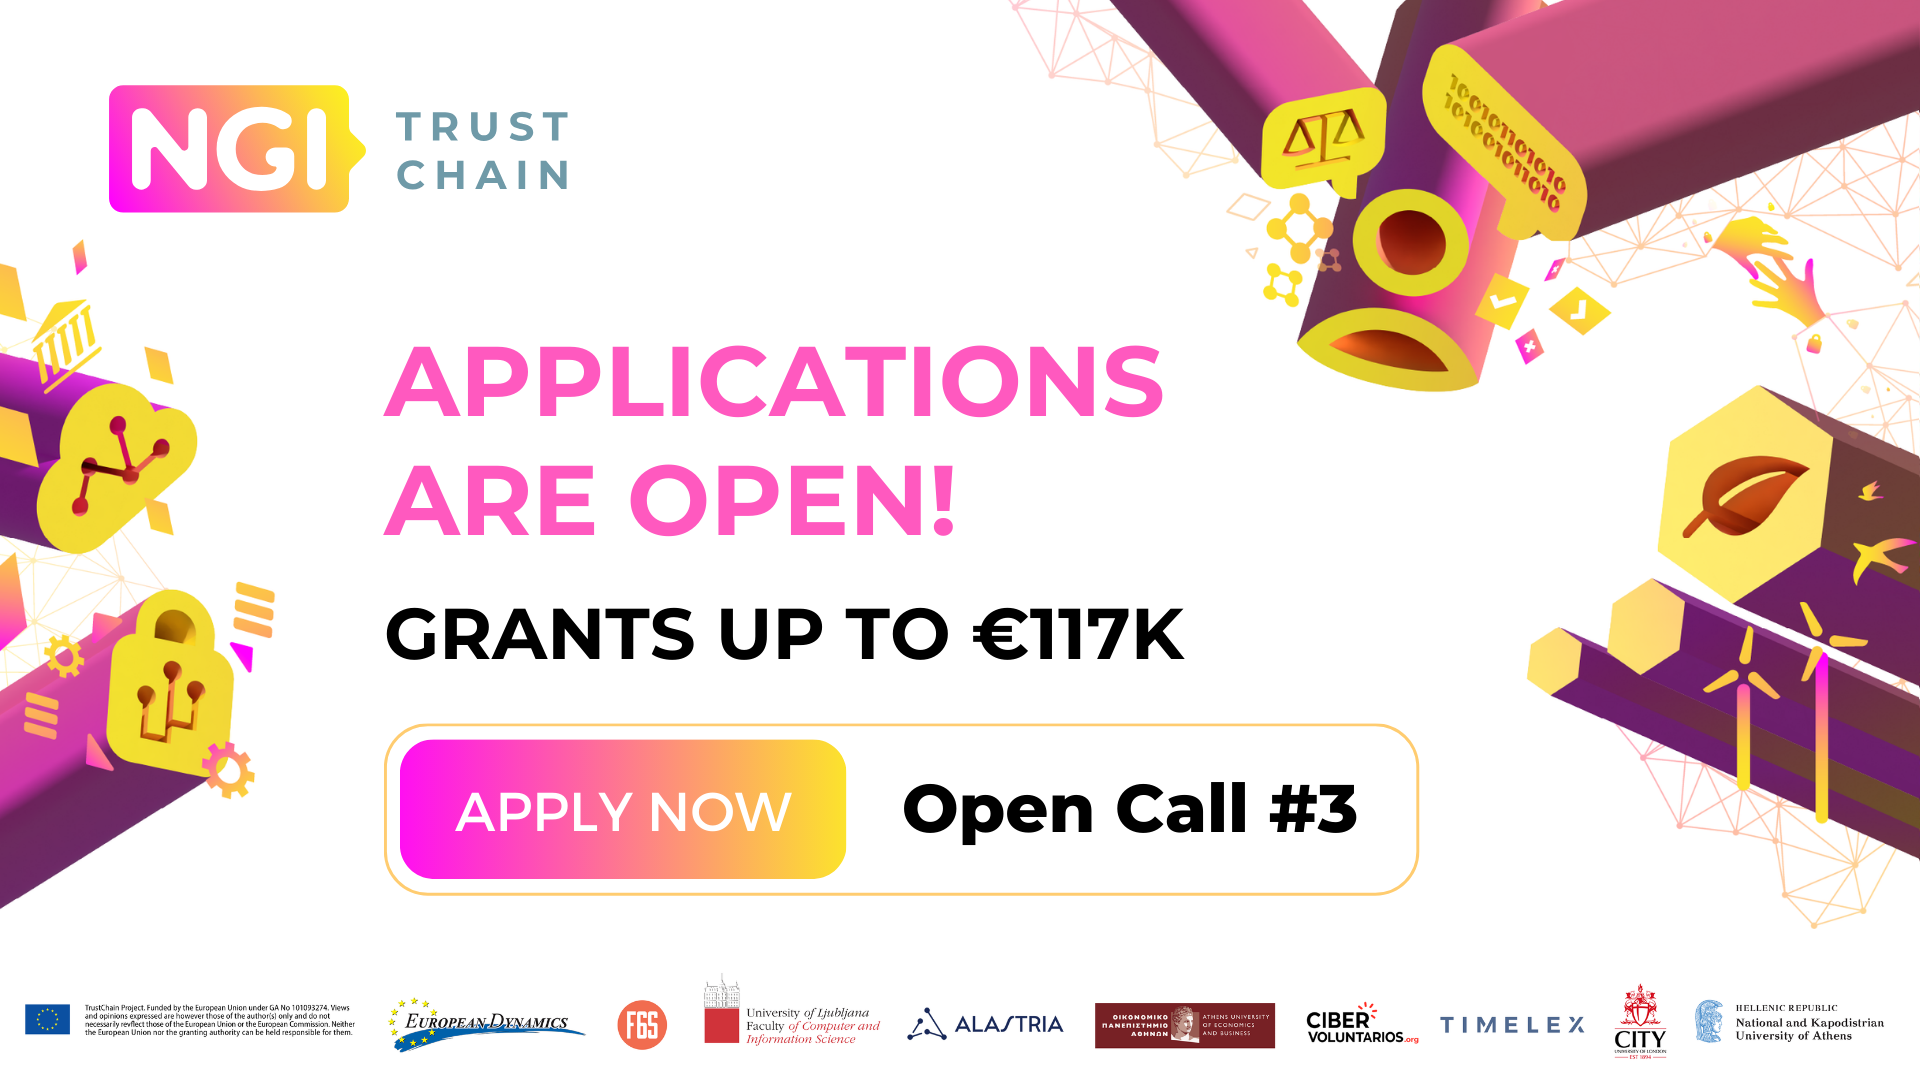 Open call: €1.755.000 will be distributed among (up to) 15 selected projects including Blockchain-related topics